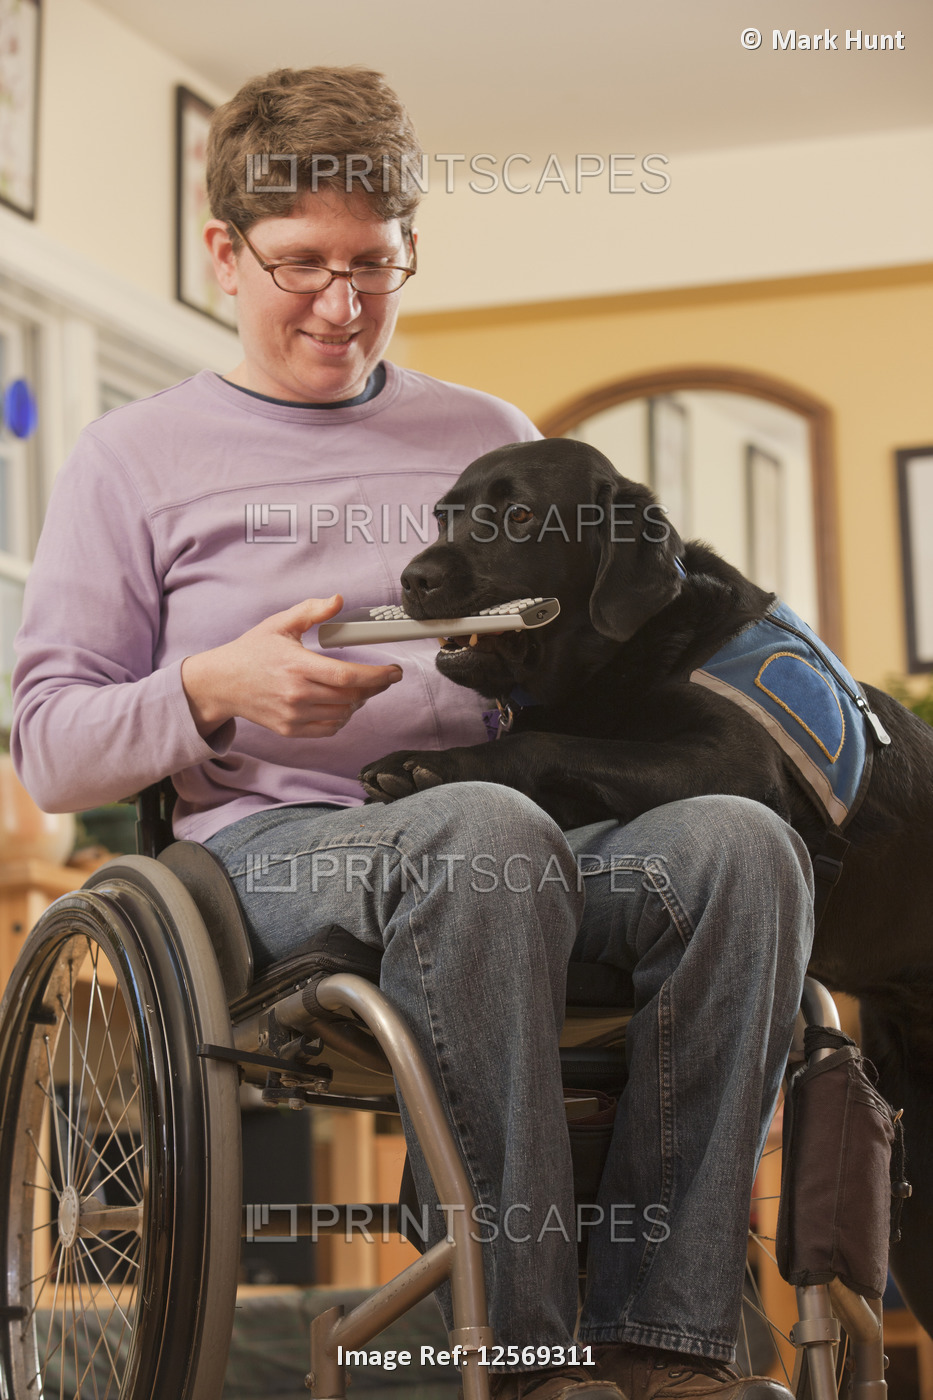 A service dog brings a remote control to a woman in a wheelchair in her home